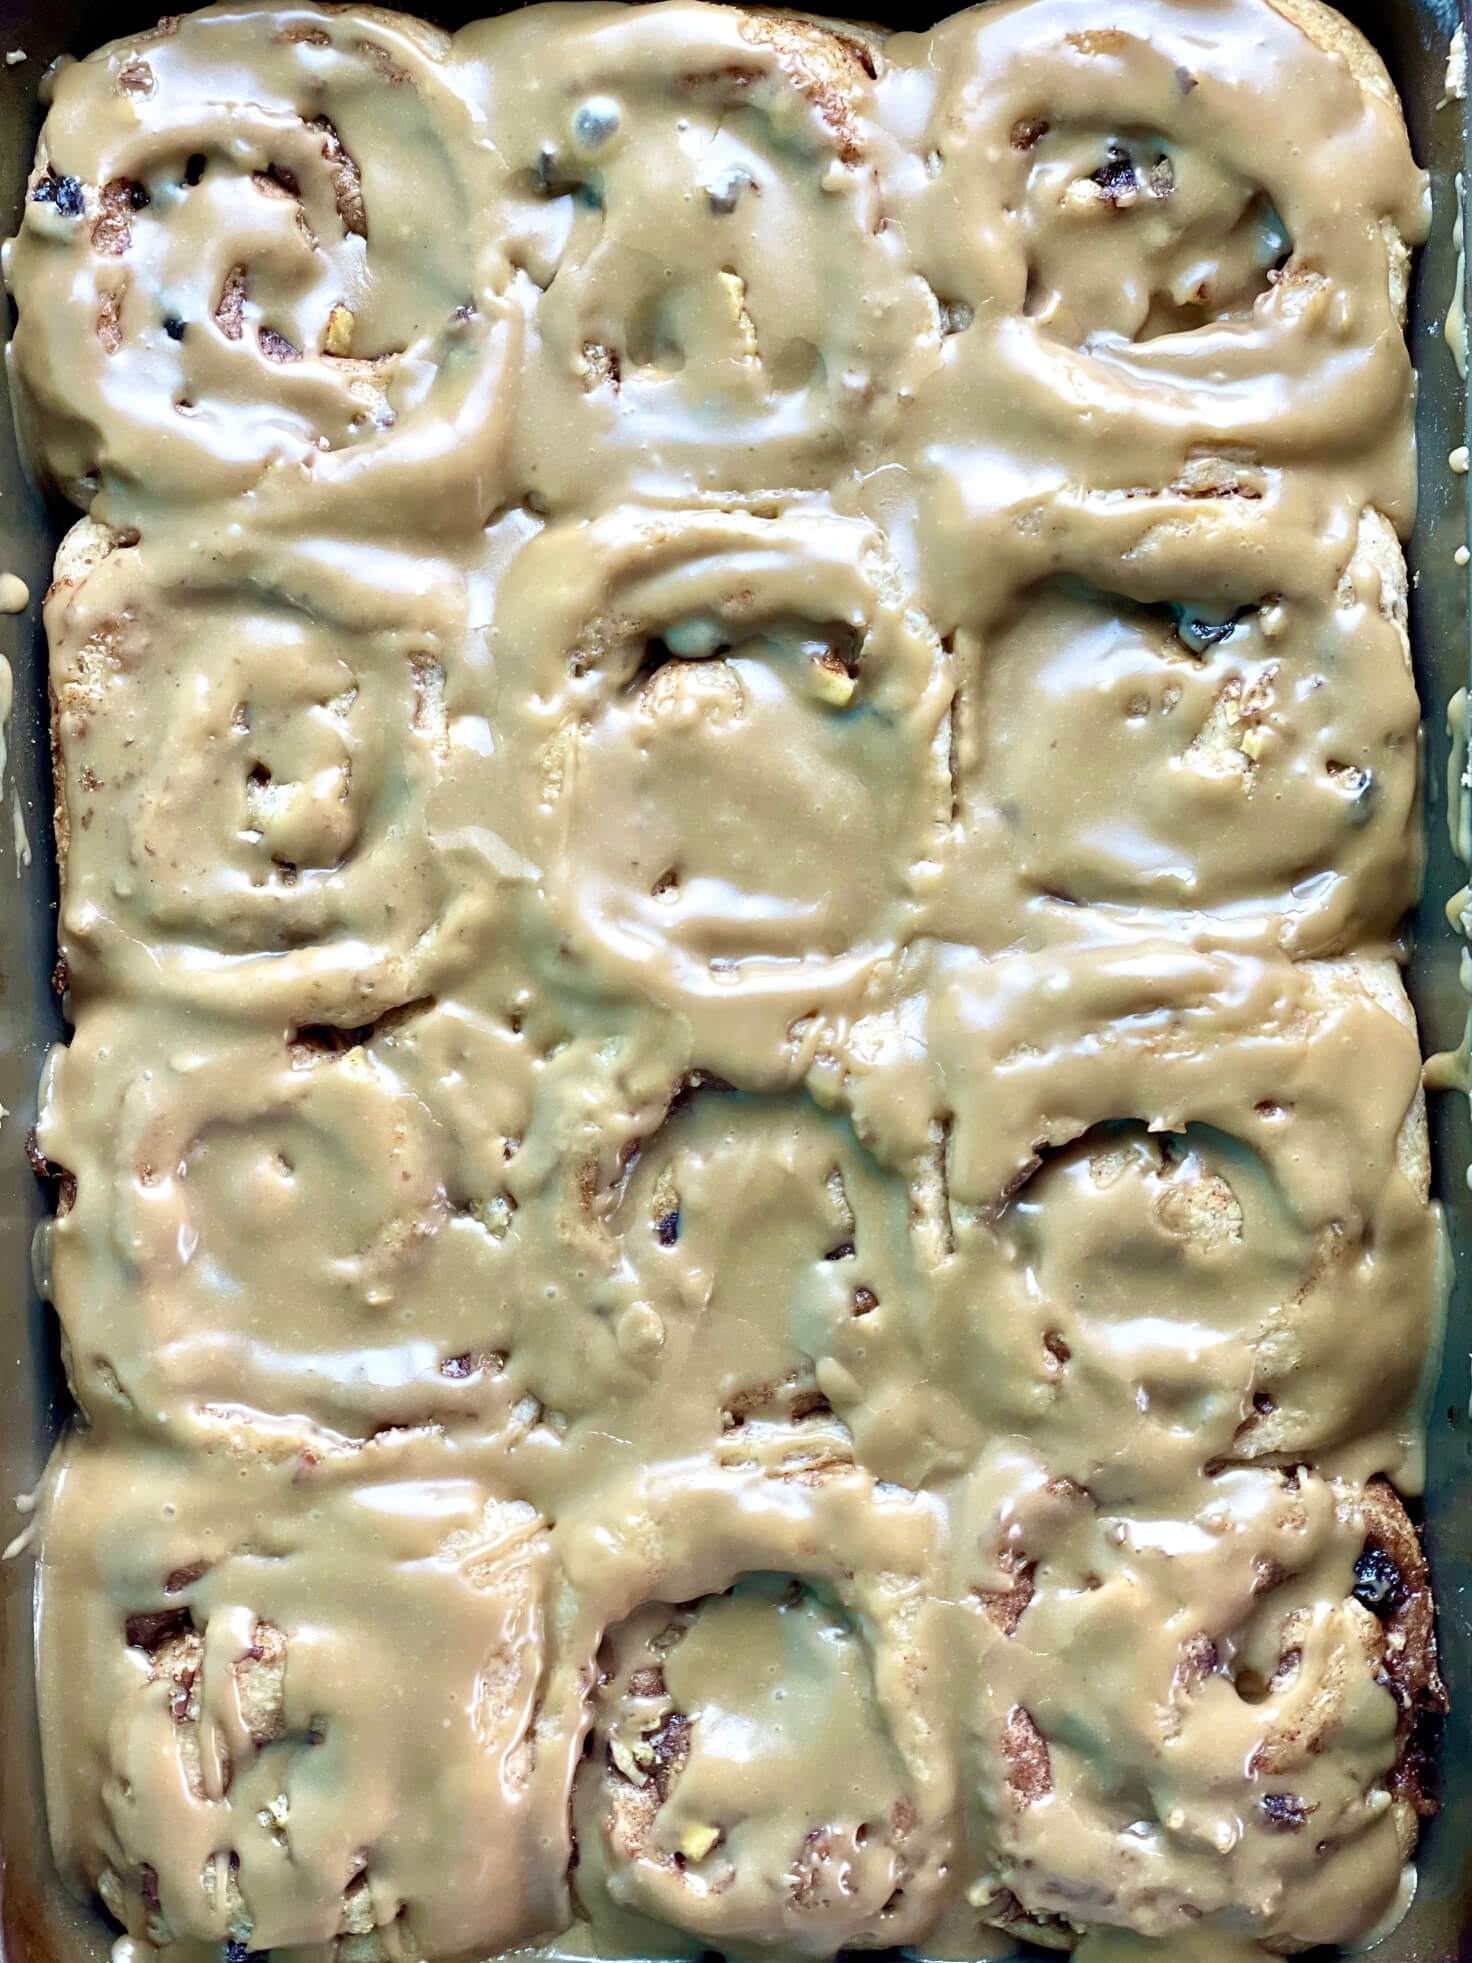 https://amycakesbakes.com/wp-content/uploads/2022/01/One-dozen-Harvest-whole-wheat-cinnamon-rolls-with-apples-raisins-and-pecans-by-Amycakes-Bakes.jpg